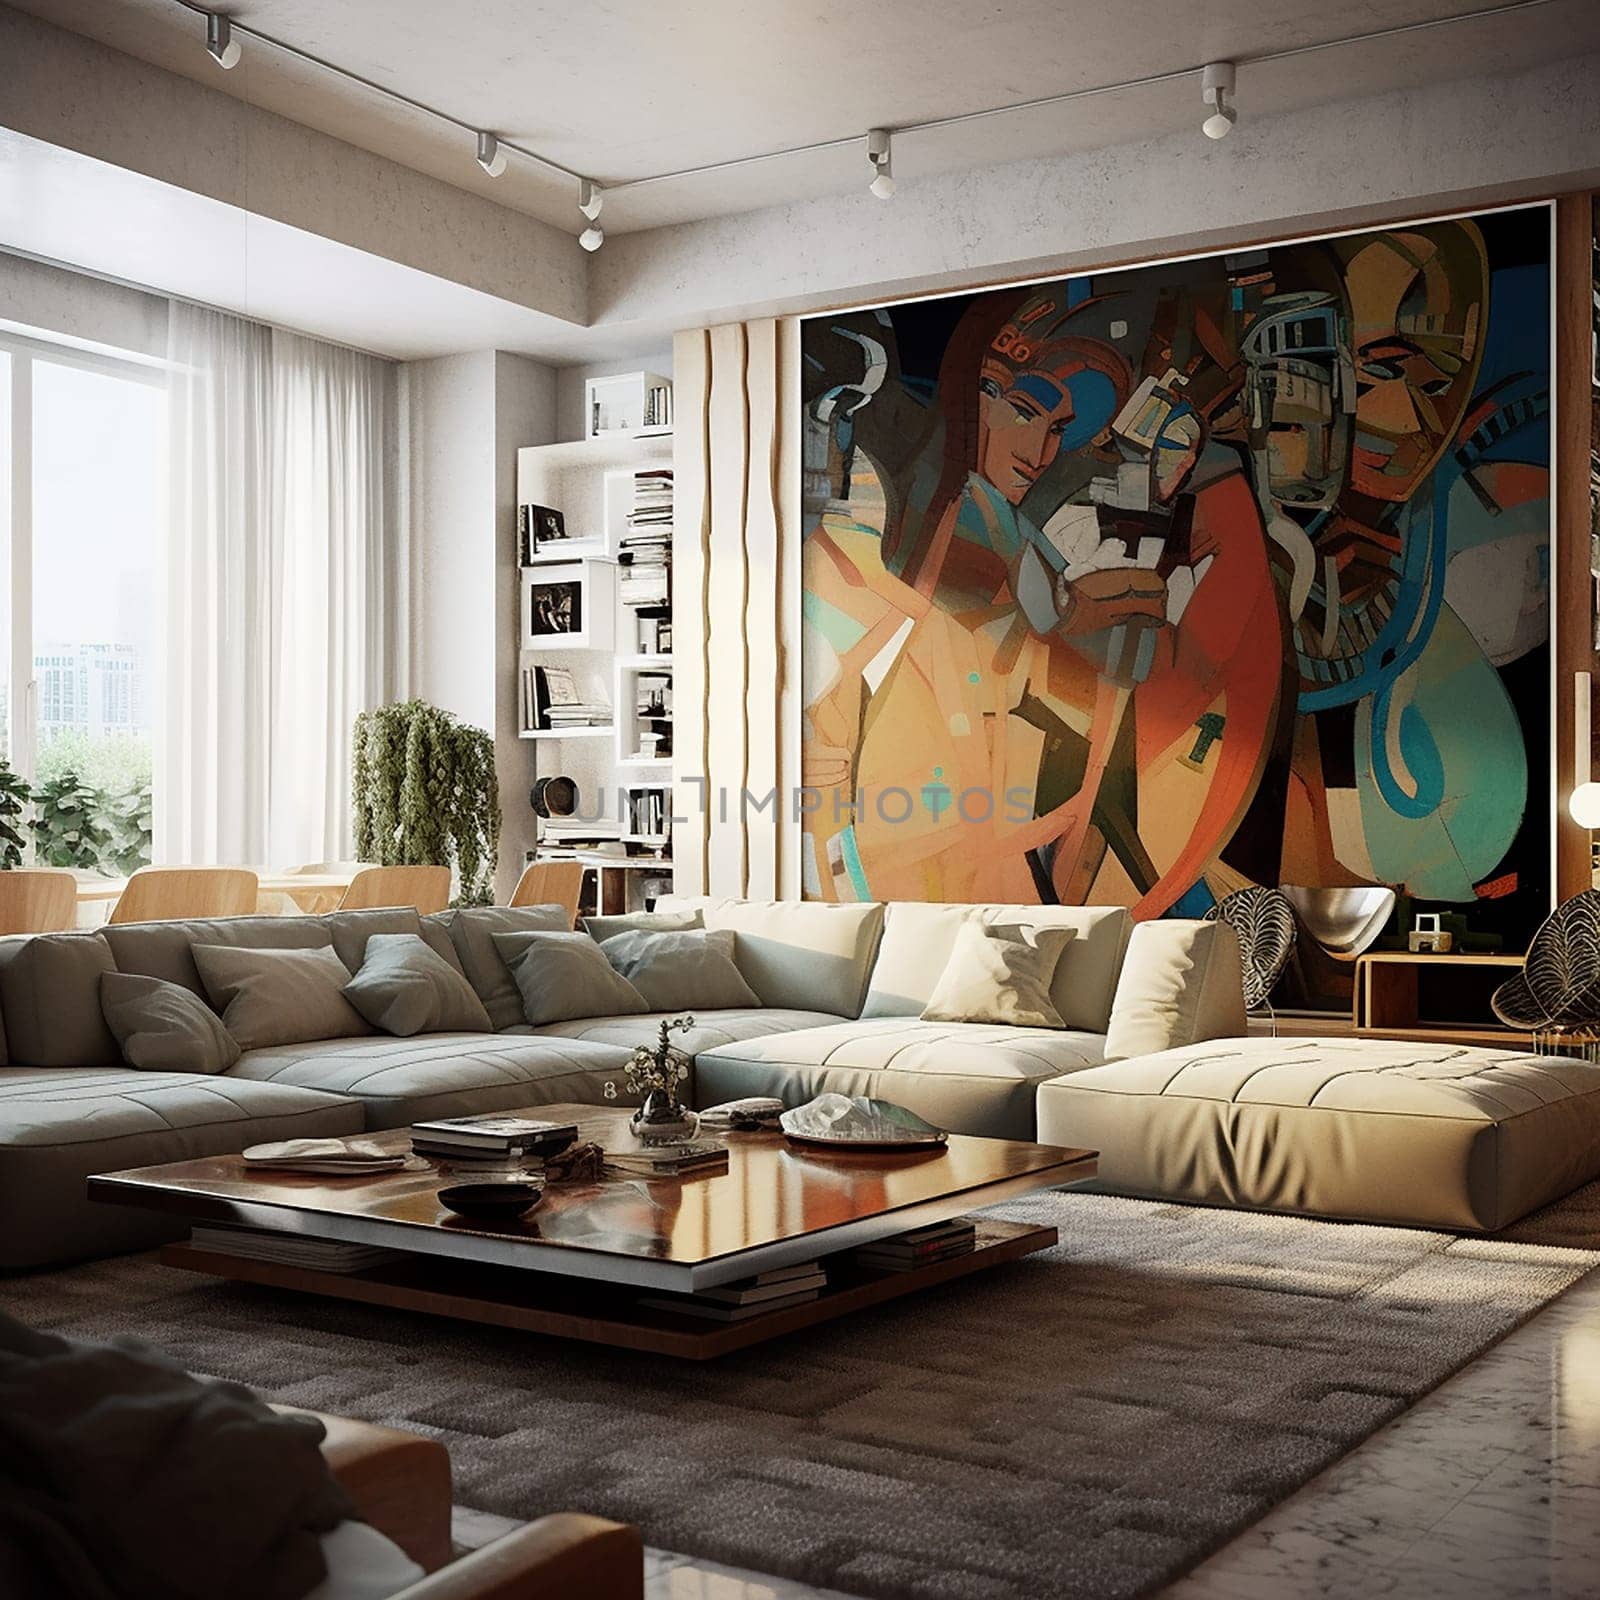 Modern living room interior with large abstract painting, comfortable beige sofa, and stylish decor.